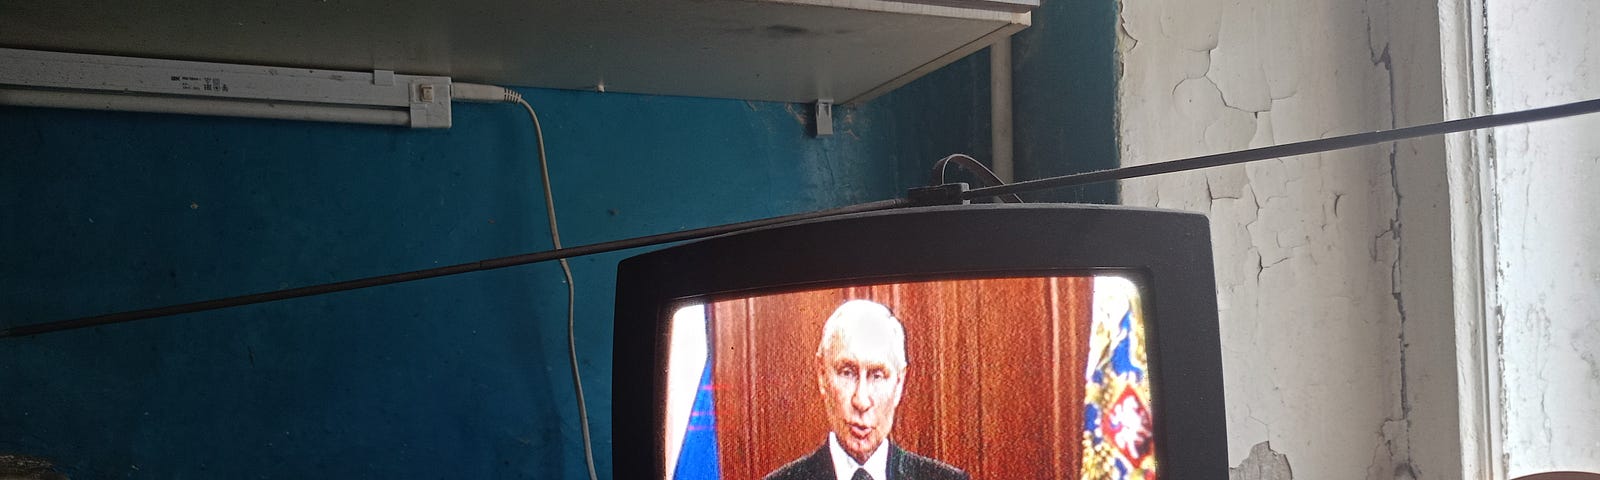 Vladimir Putin, President of Russia, is seen on TV as he addresses Russian citizens about PMC Wagner in June 2023.